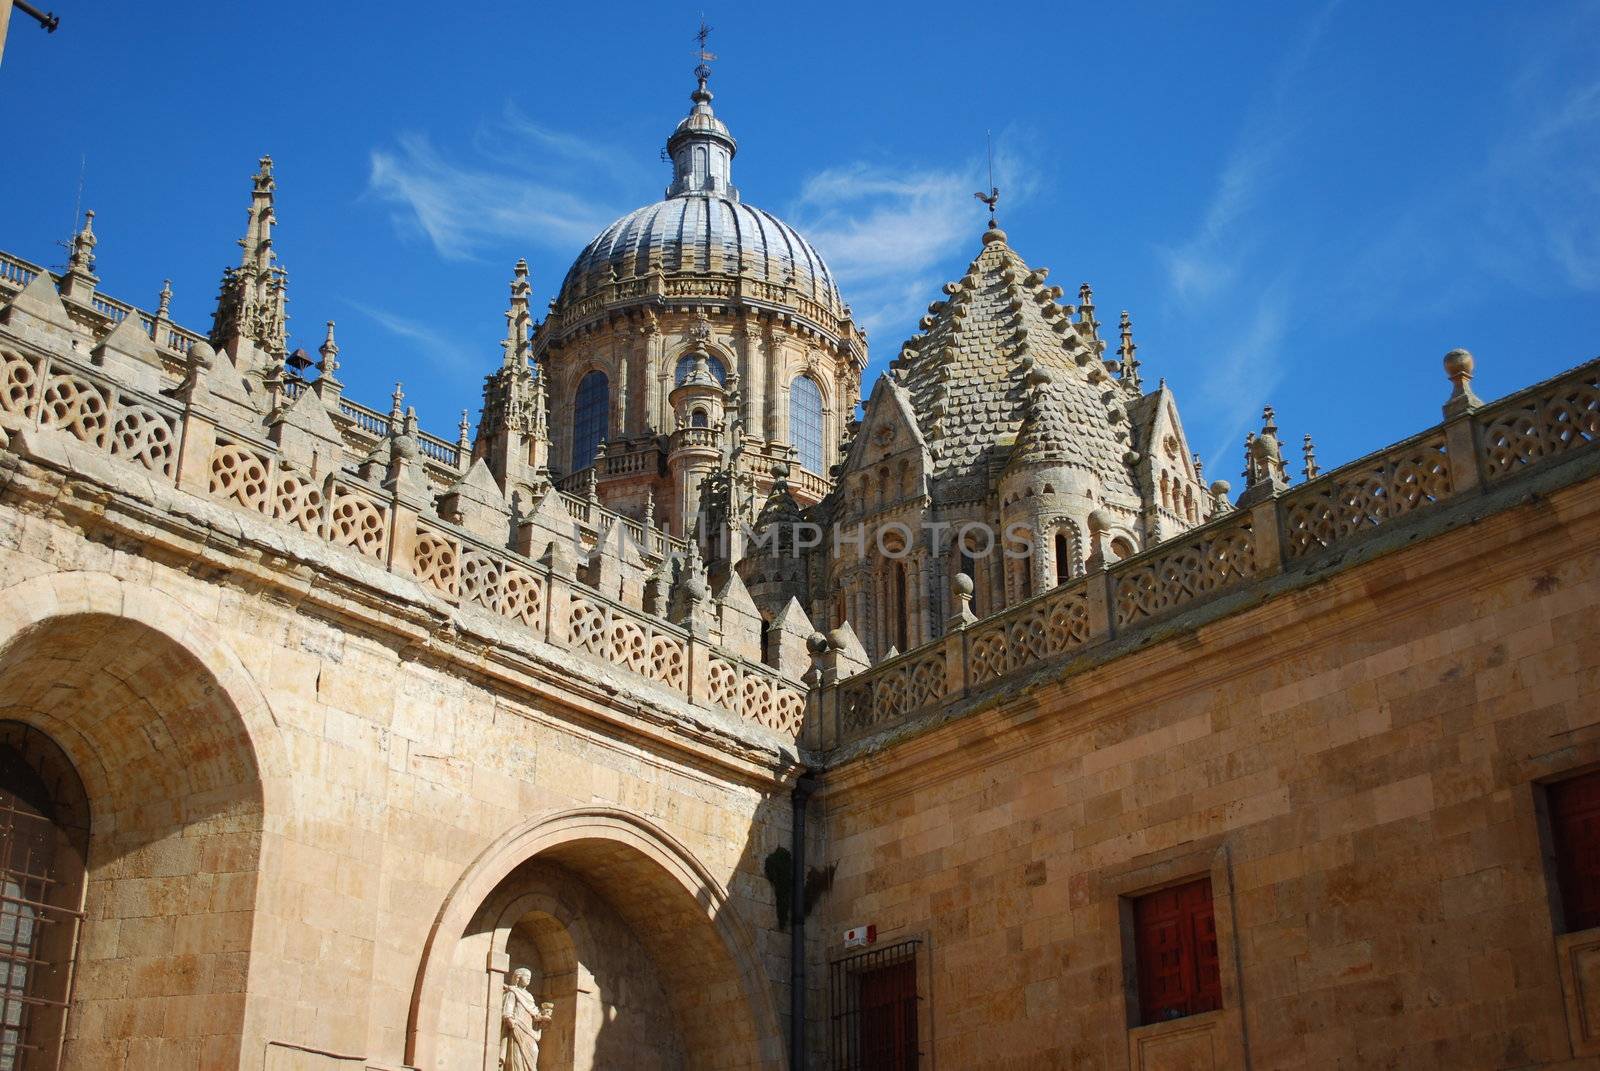 New Cathedral Dome in Salamanca, Spain by luissantos84